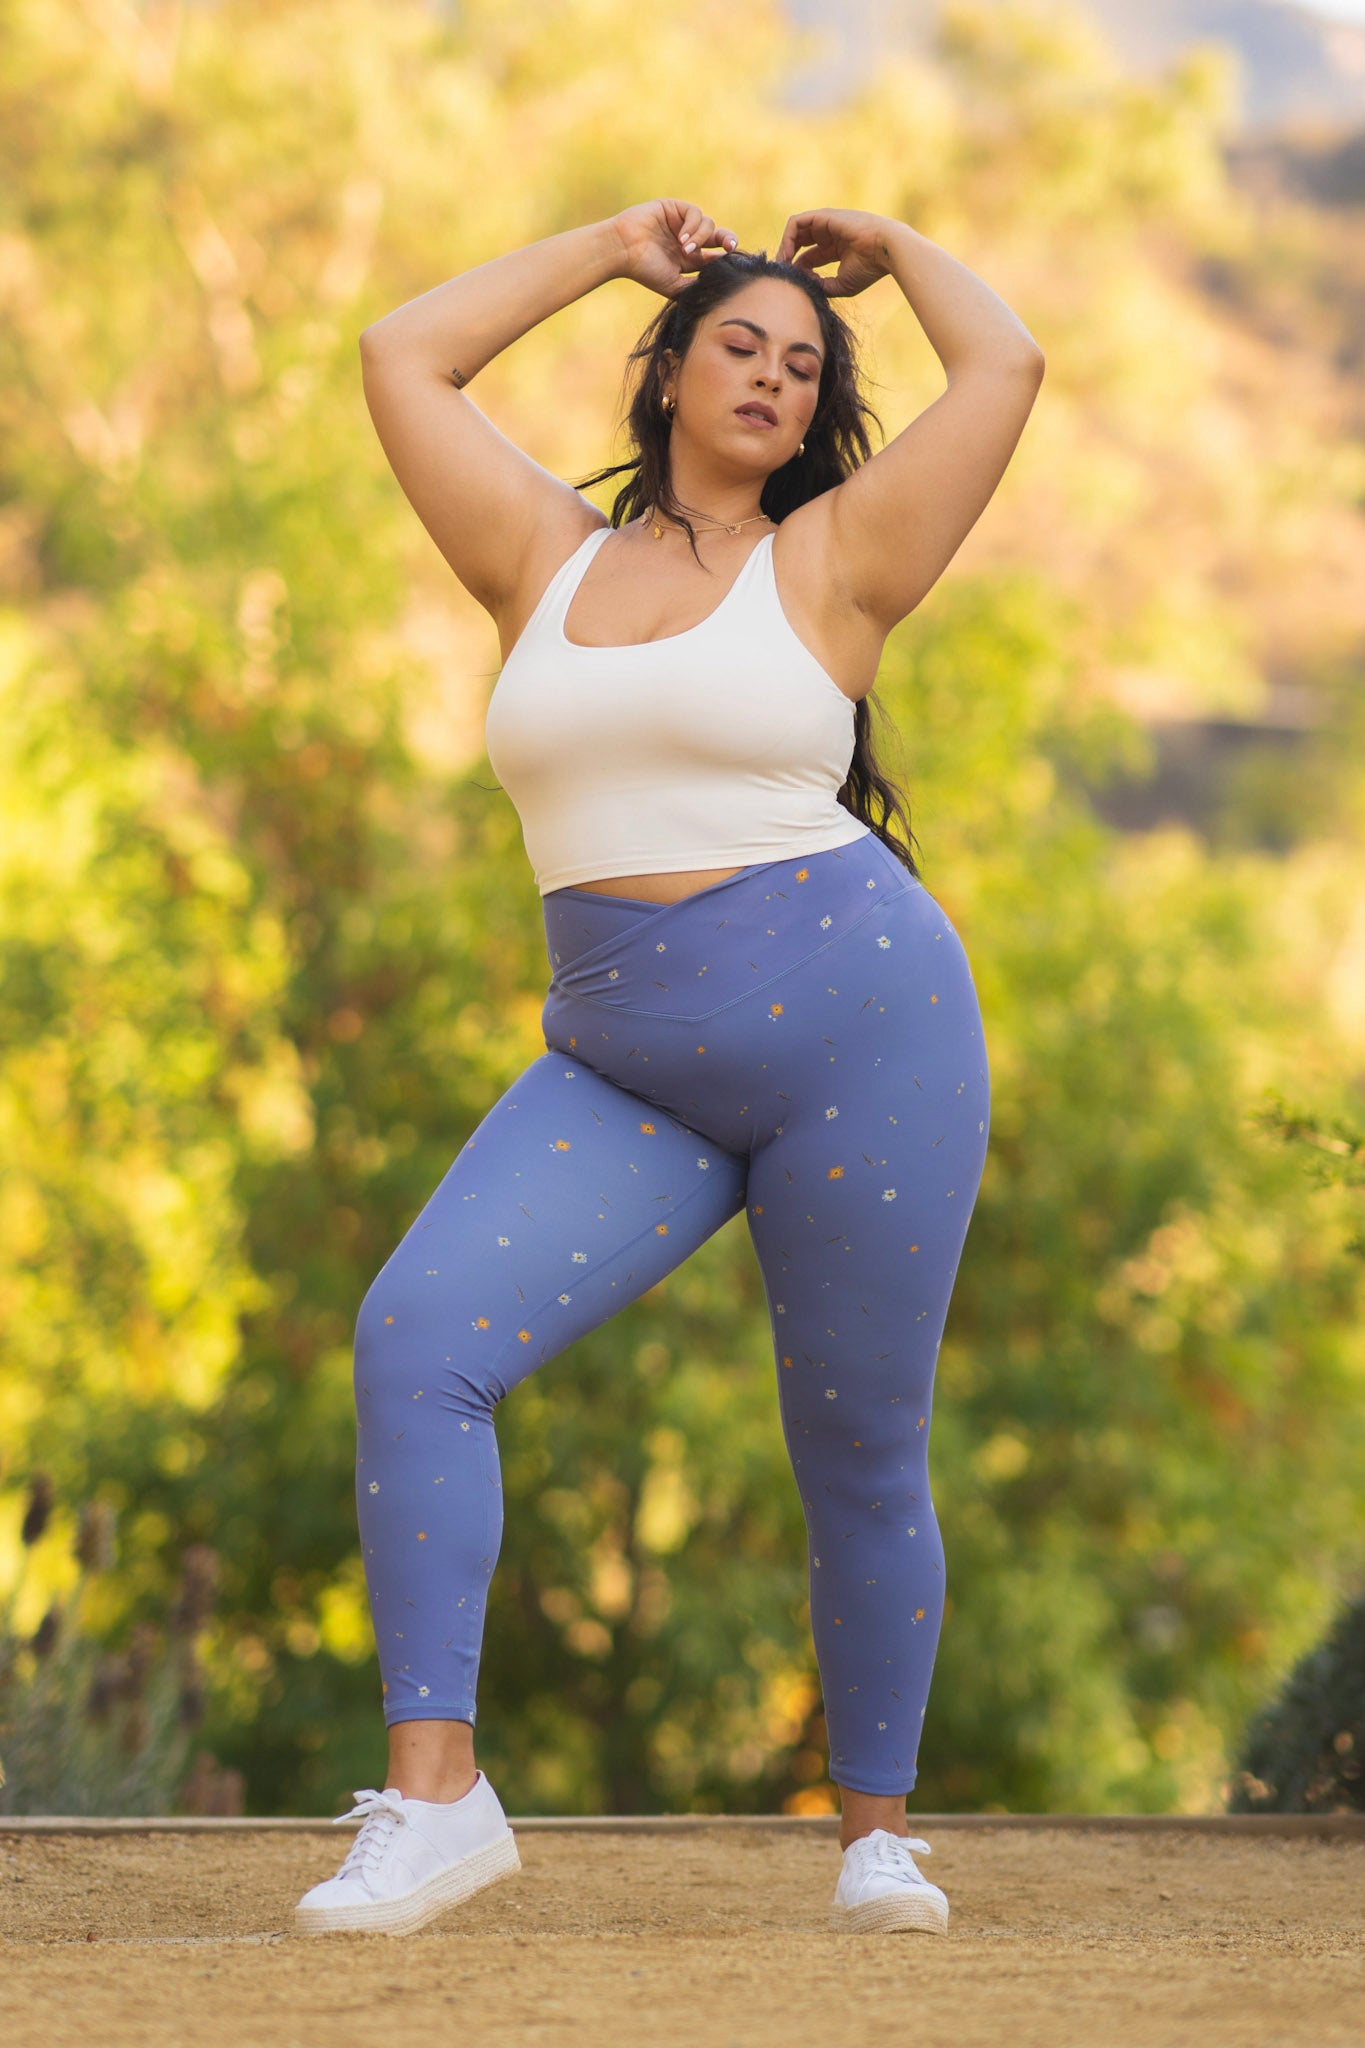 Plus size model wears ultimate hourglass legging from the POPFLEX cute activewear high-quality atheisure cottagecore collection